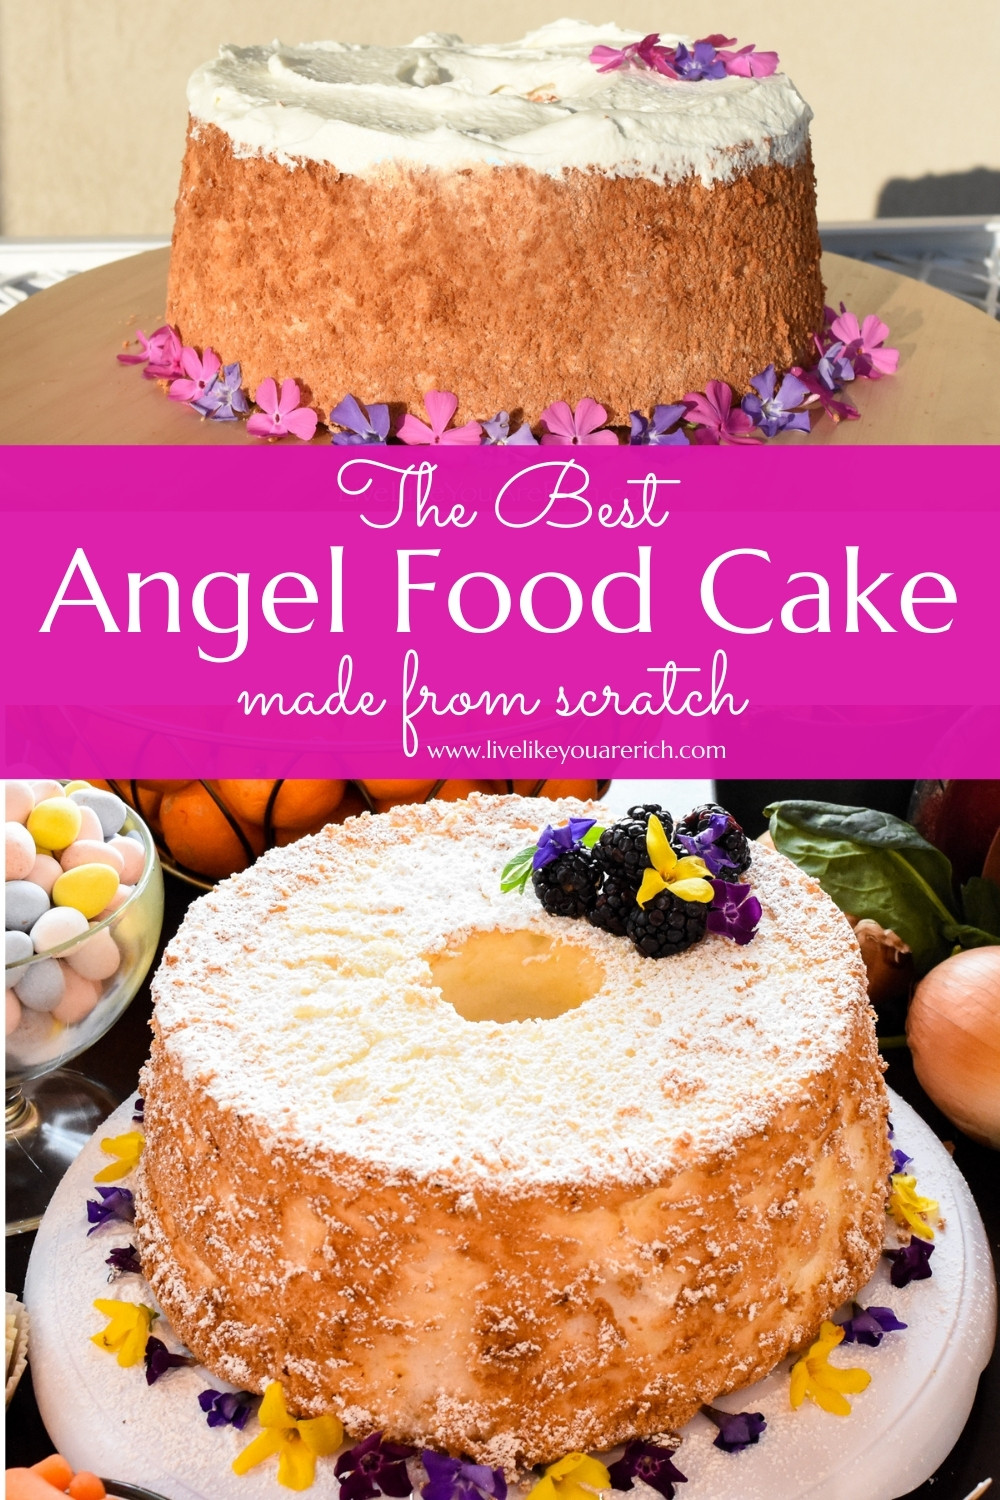 Angel Food Cake made from Scratch